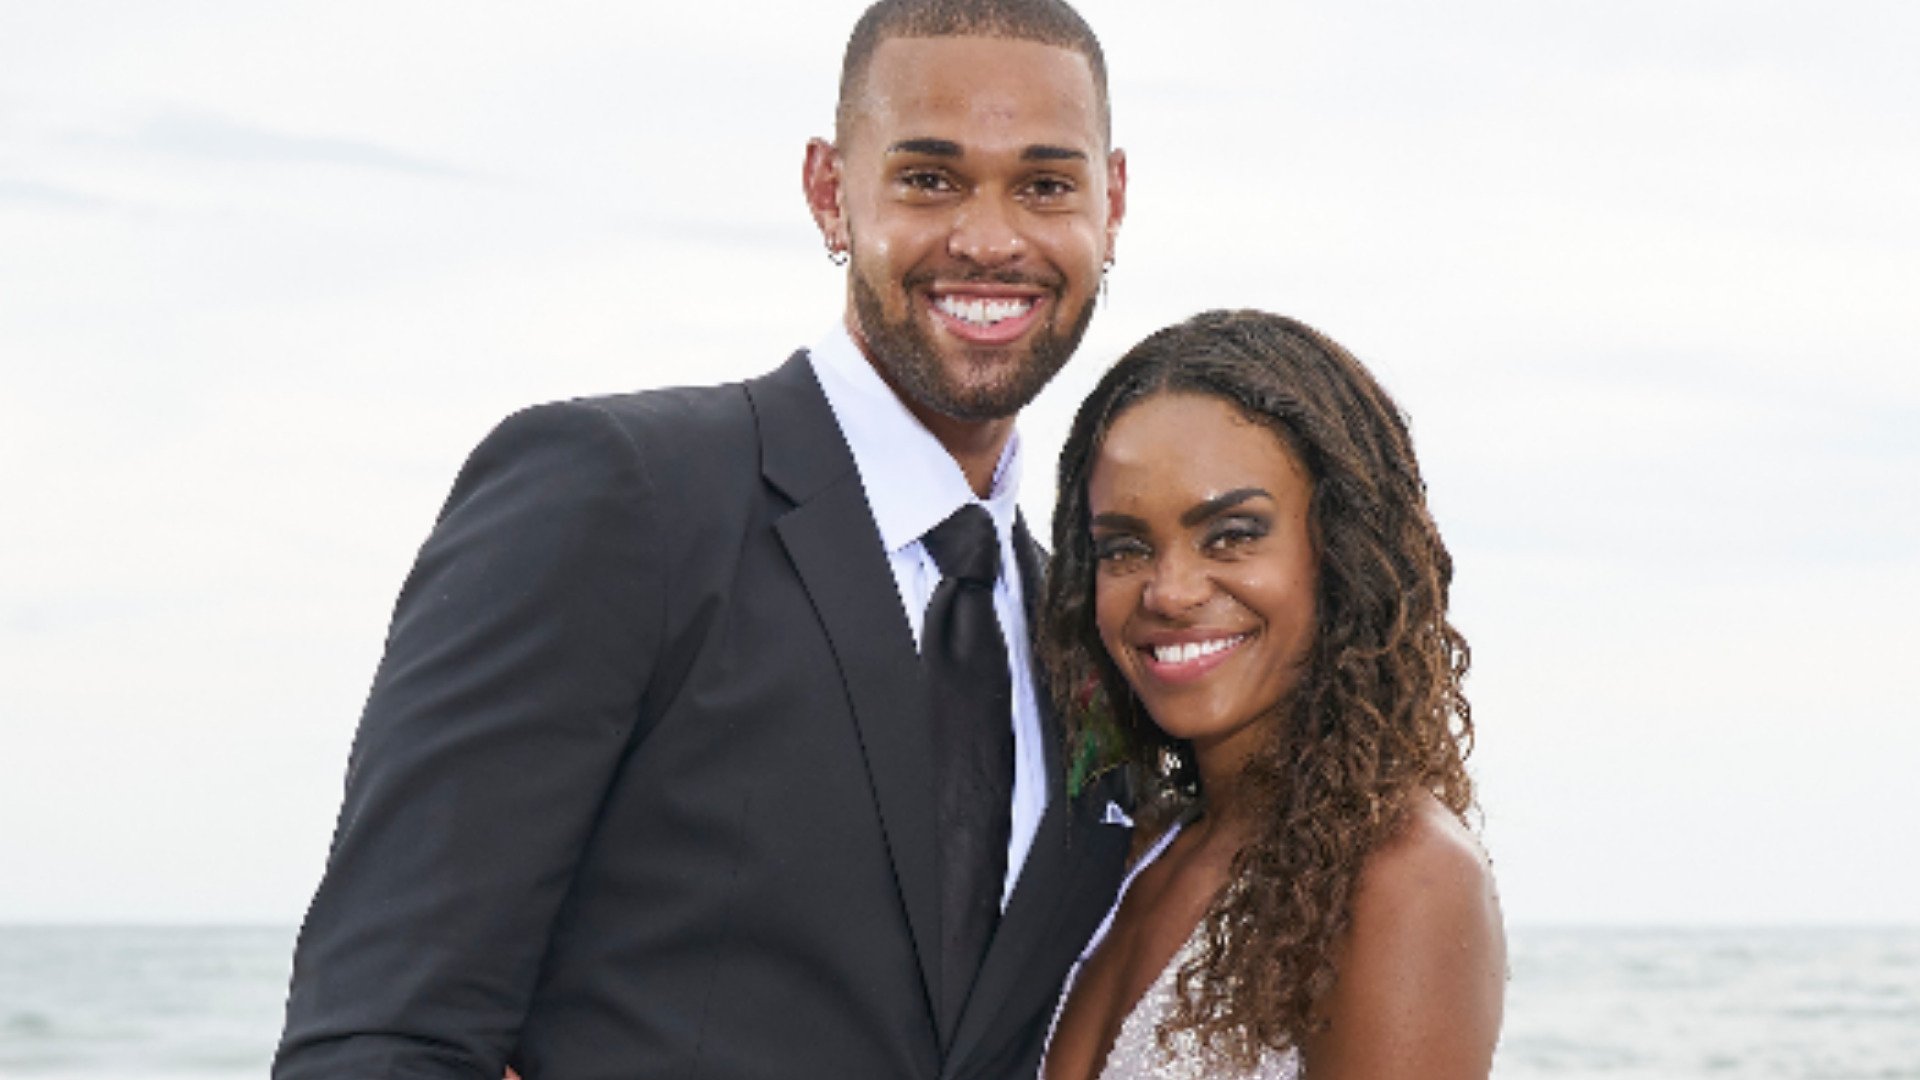 Nayte Olukoya and Michelle Young pose together after they get engaged in ‘The Bachelorette’ Season 18 in 2021